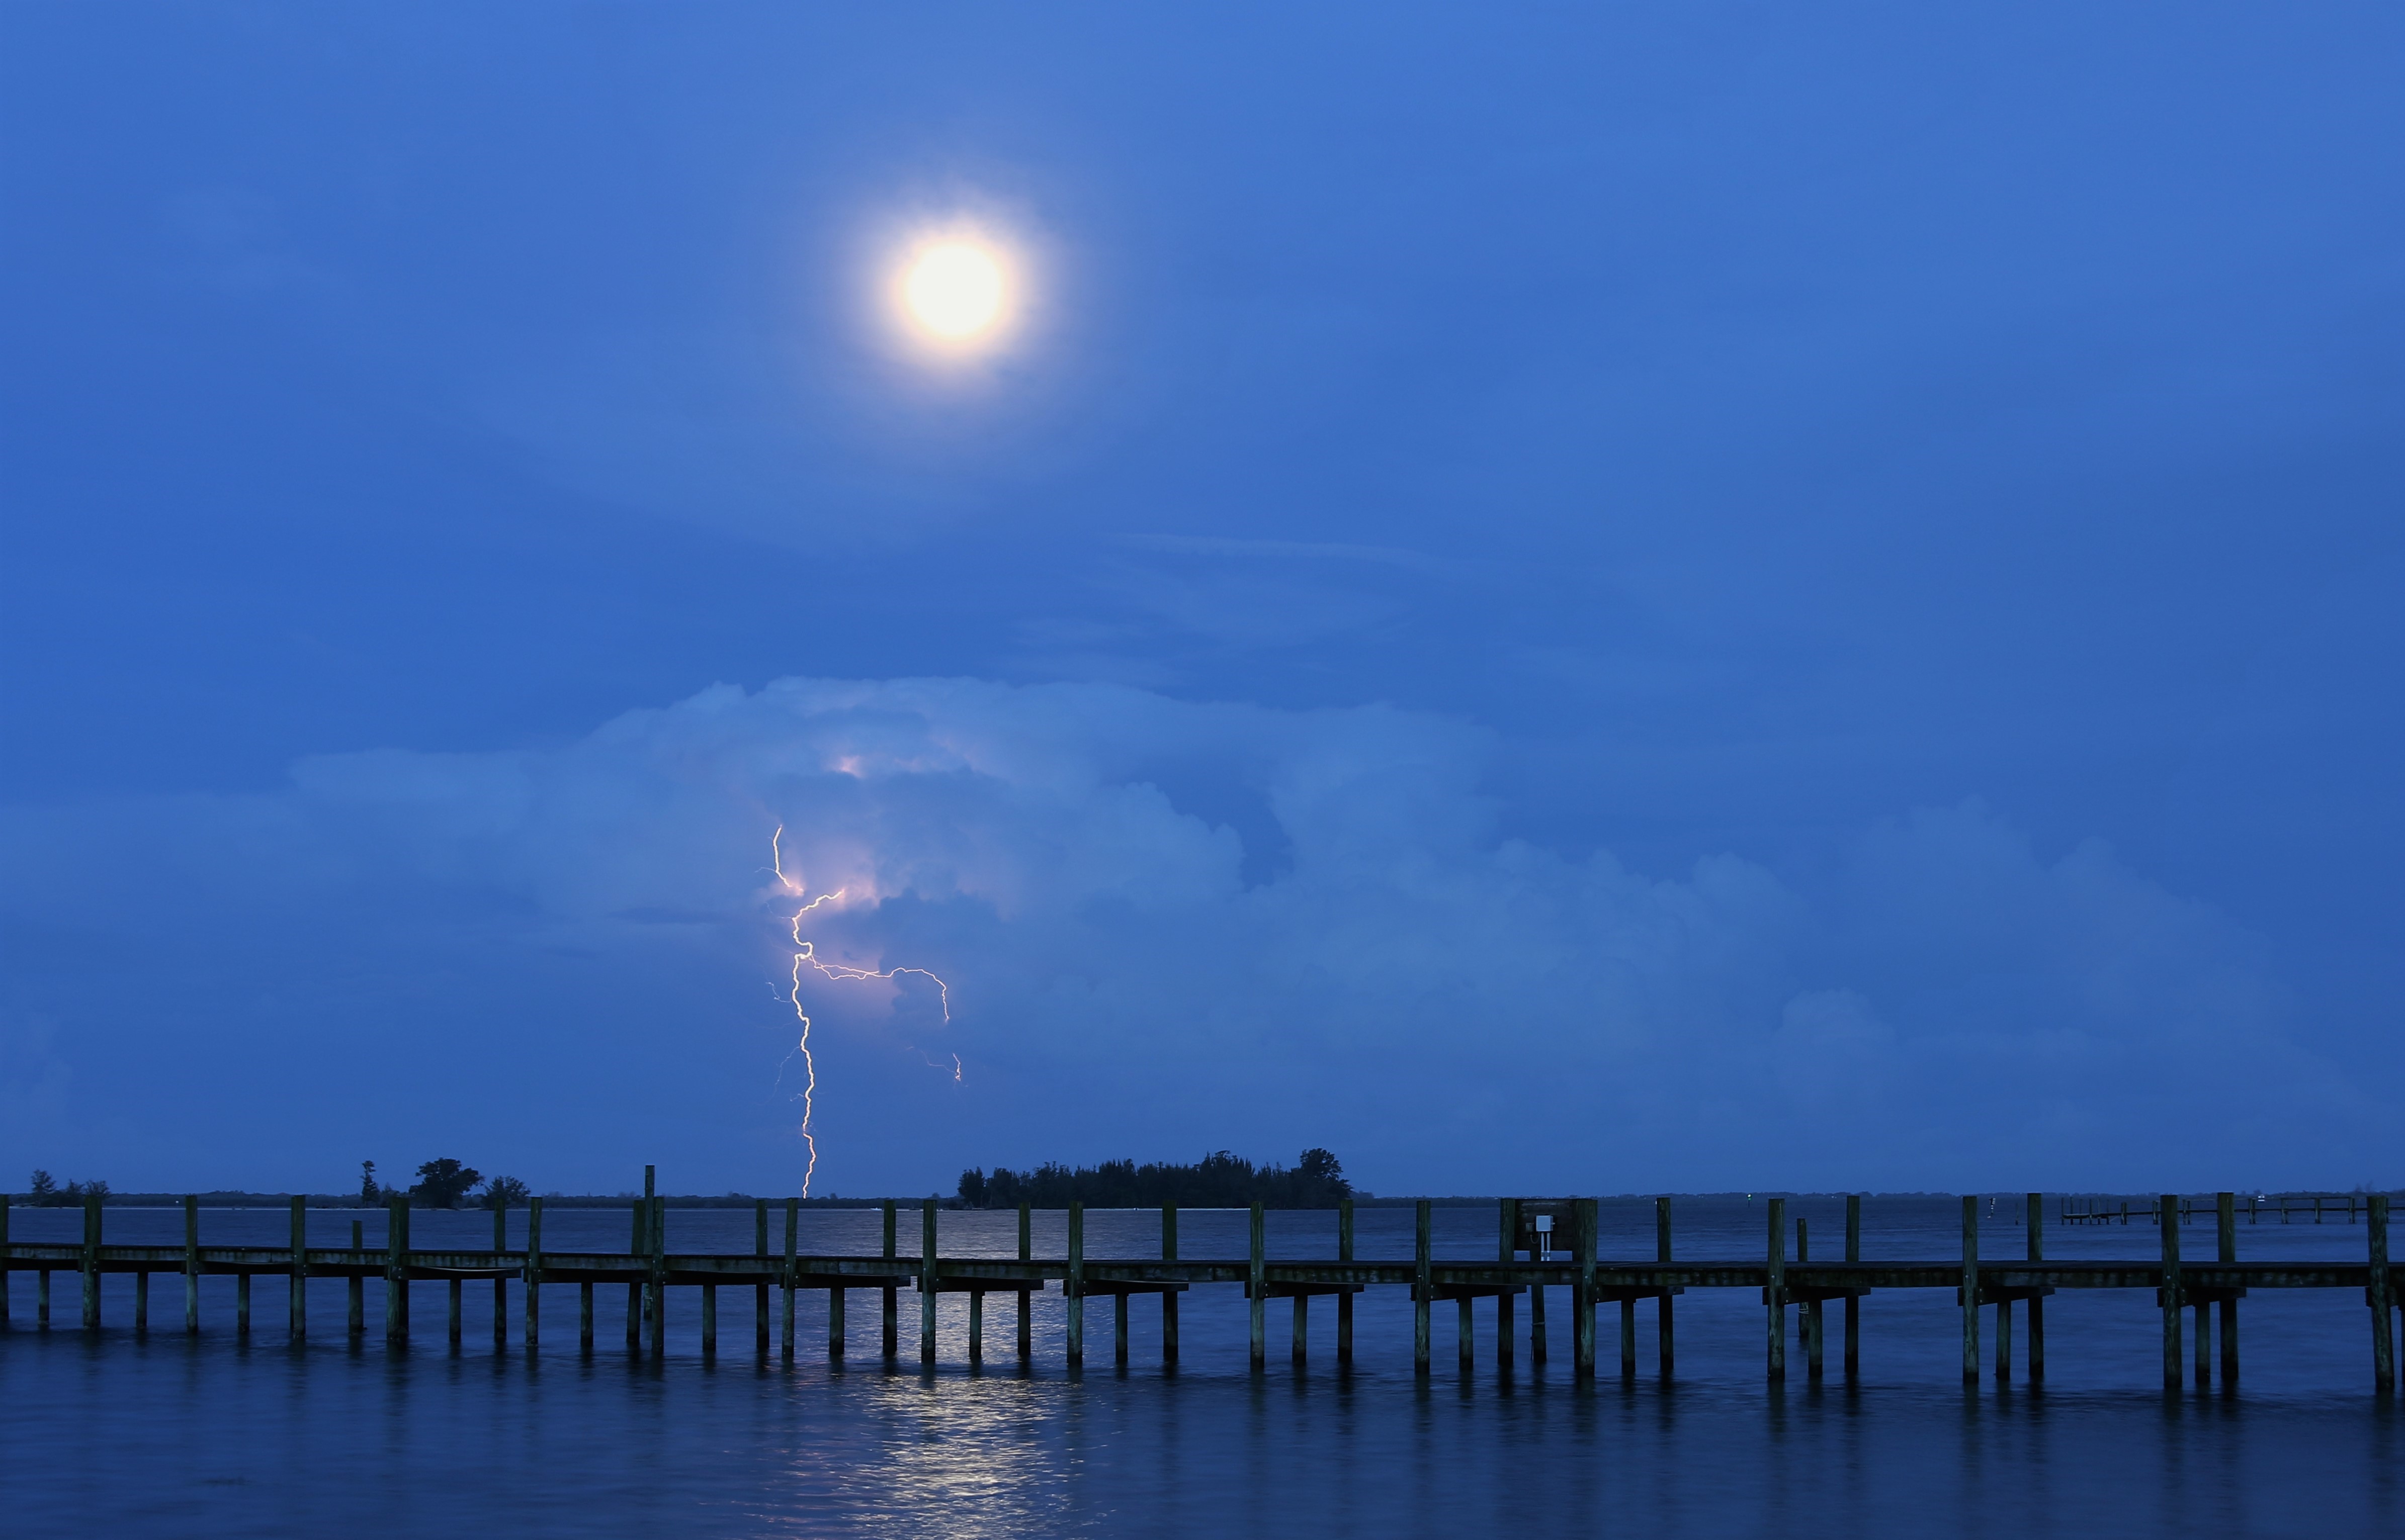 Lightning and the Moon